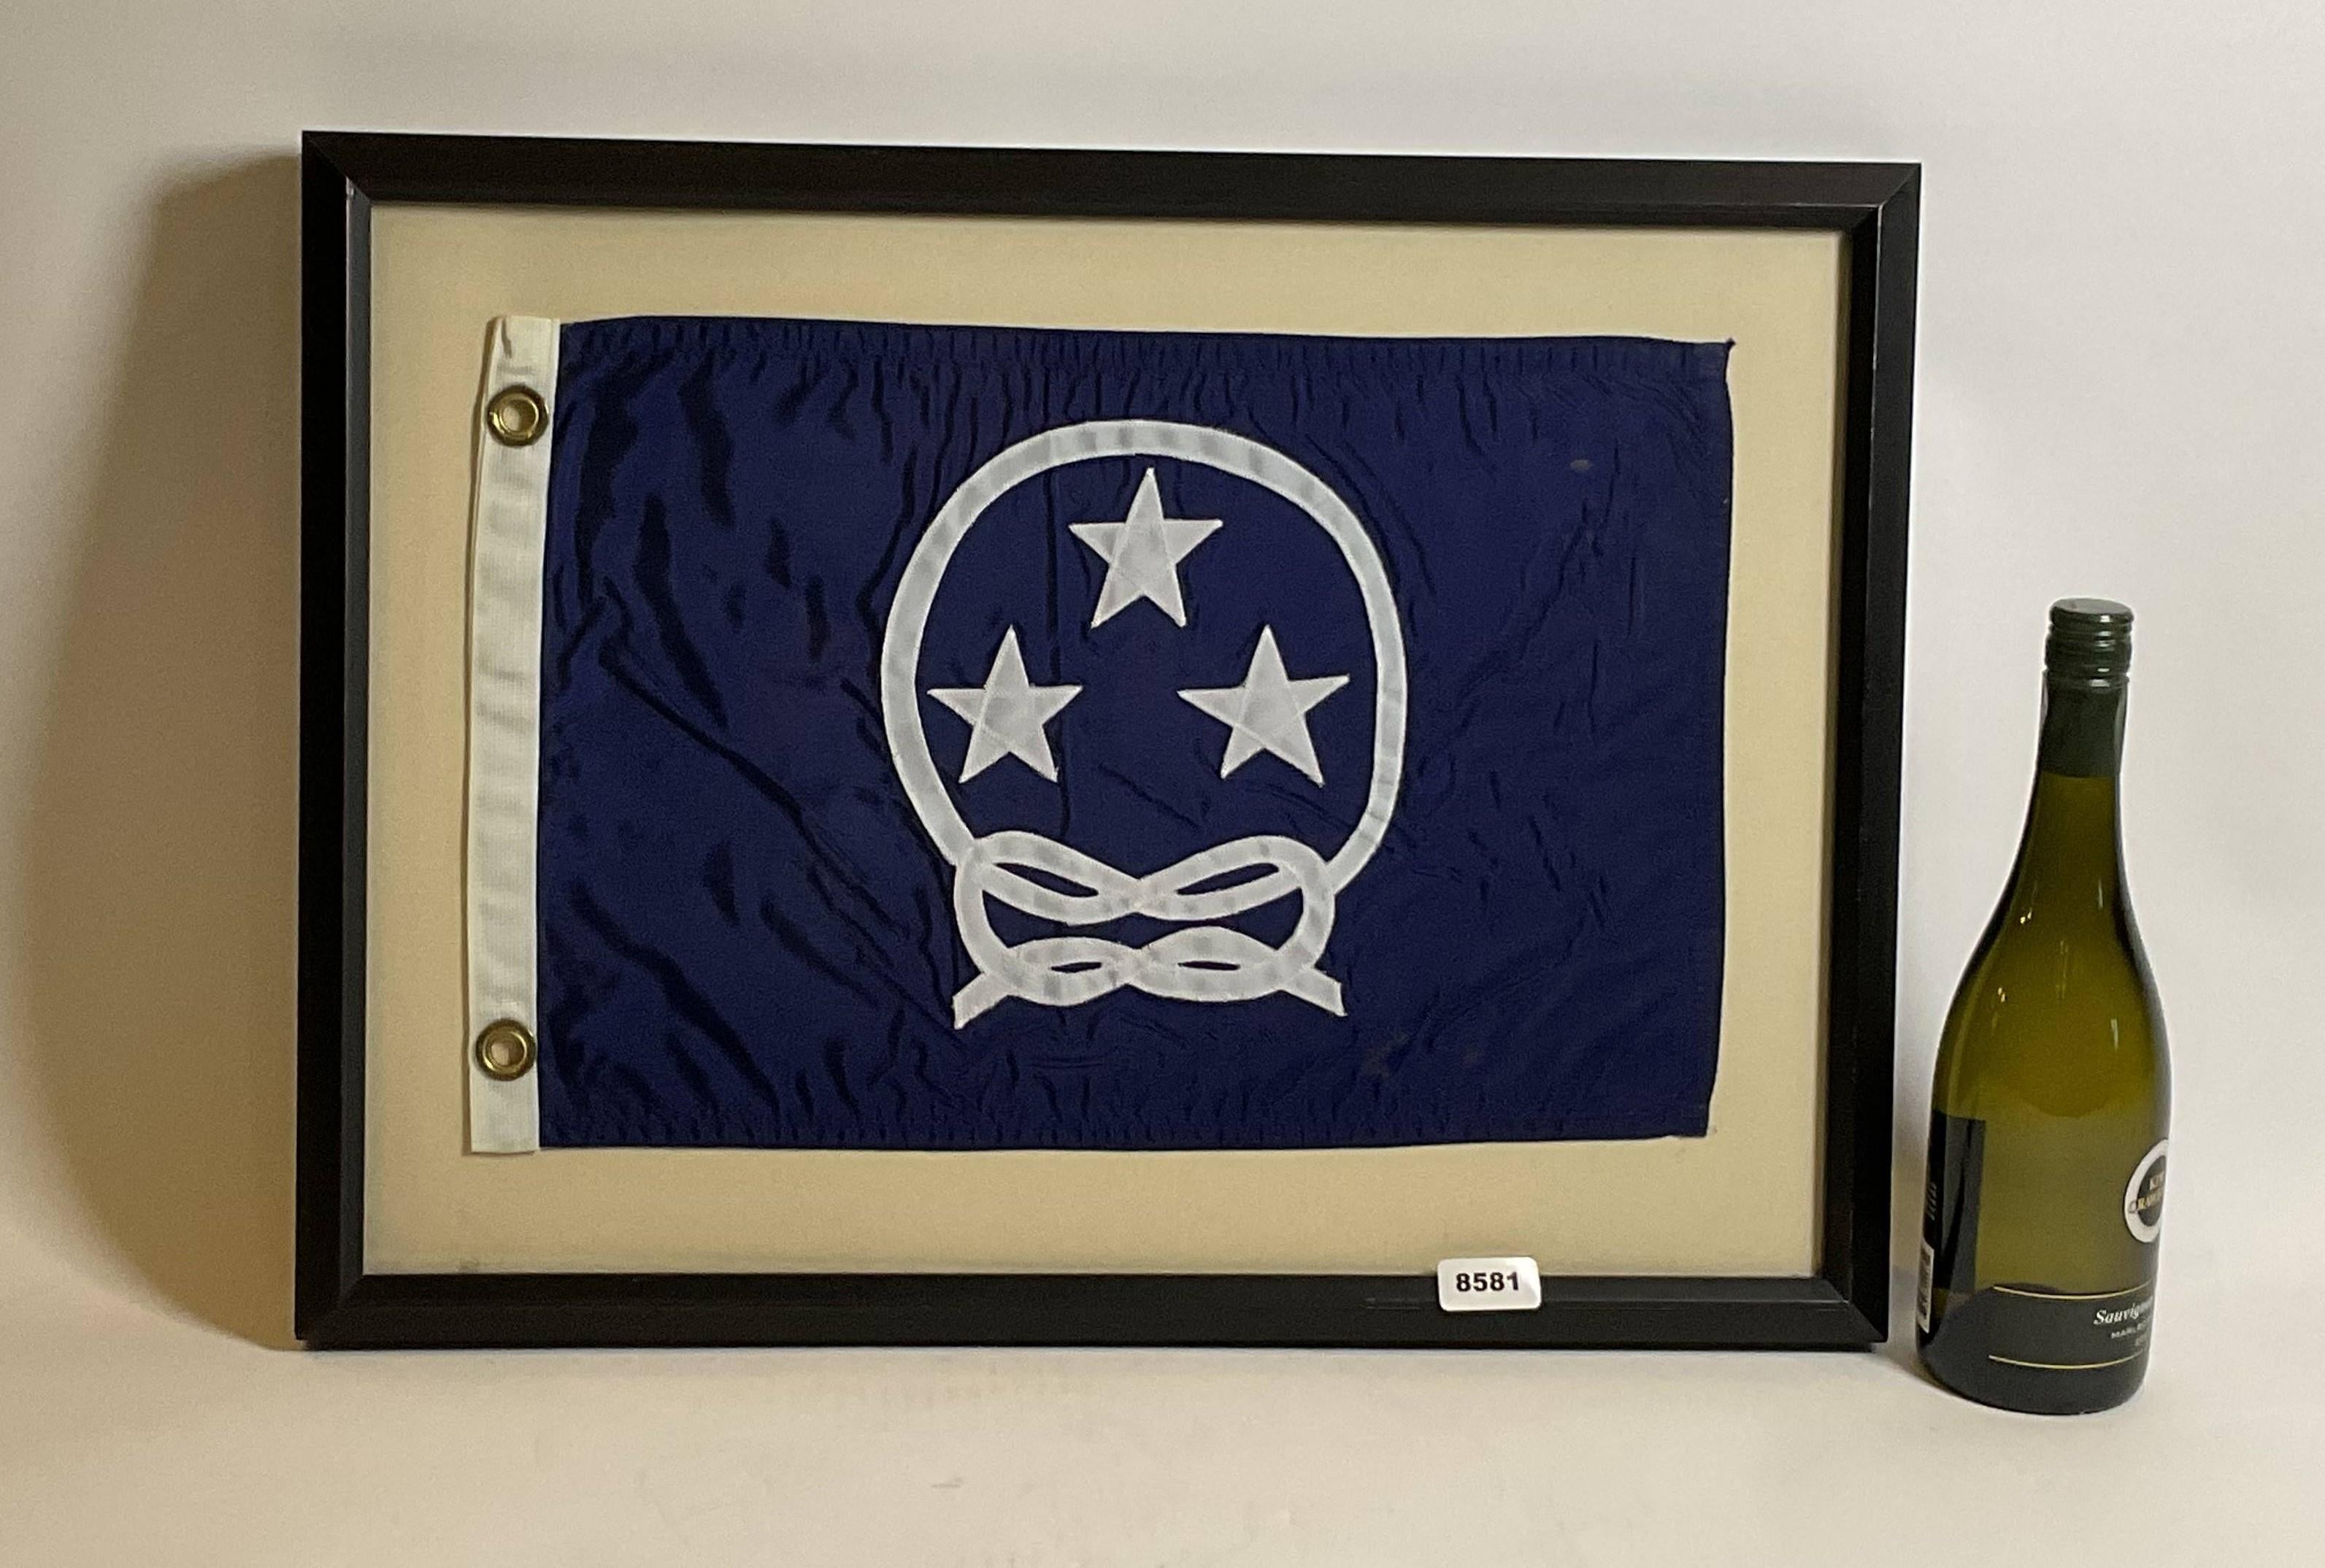 Nautical Boat Flag in Frame. Yacht club commodores flag showing three stars surrounded by a knotted rope. White hoist with brass grommets. Set into a custom frame.

Weight: 5 lbs
Overall Dimensions: 18